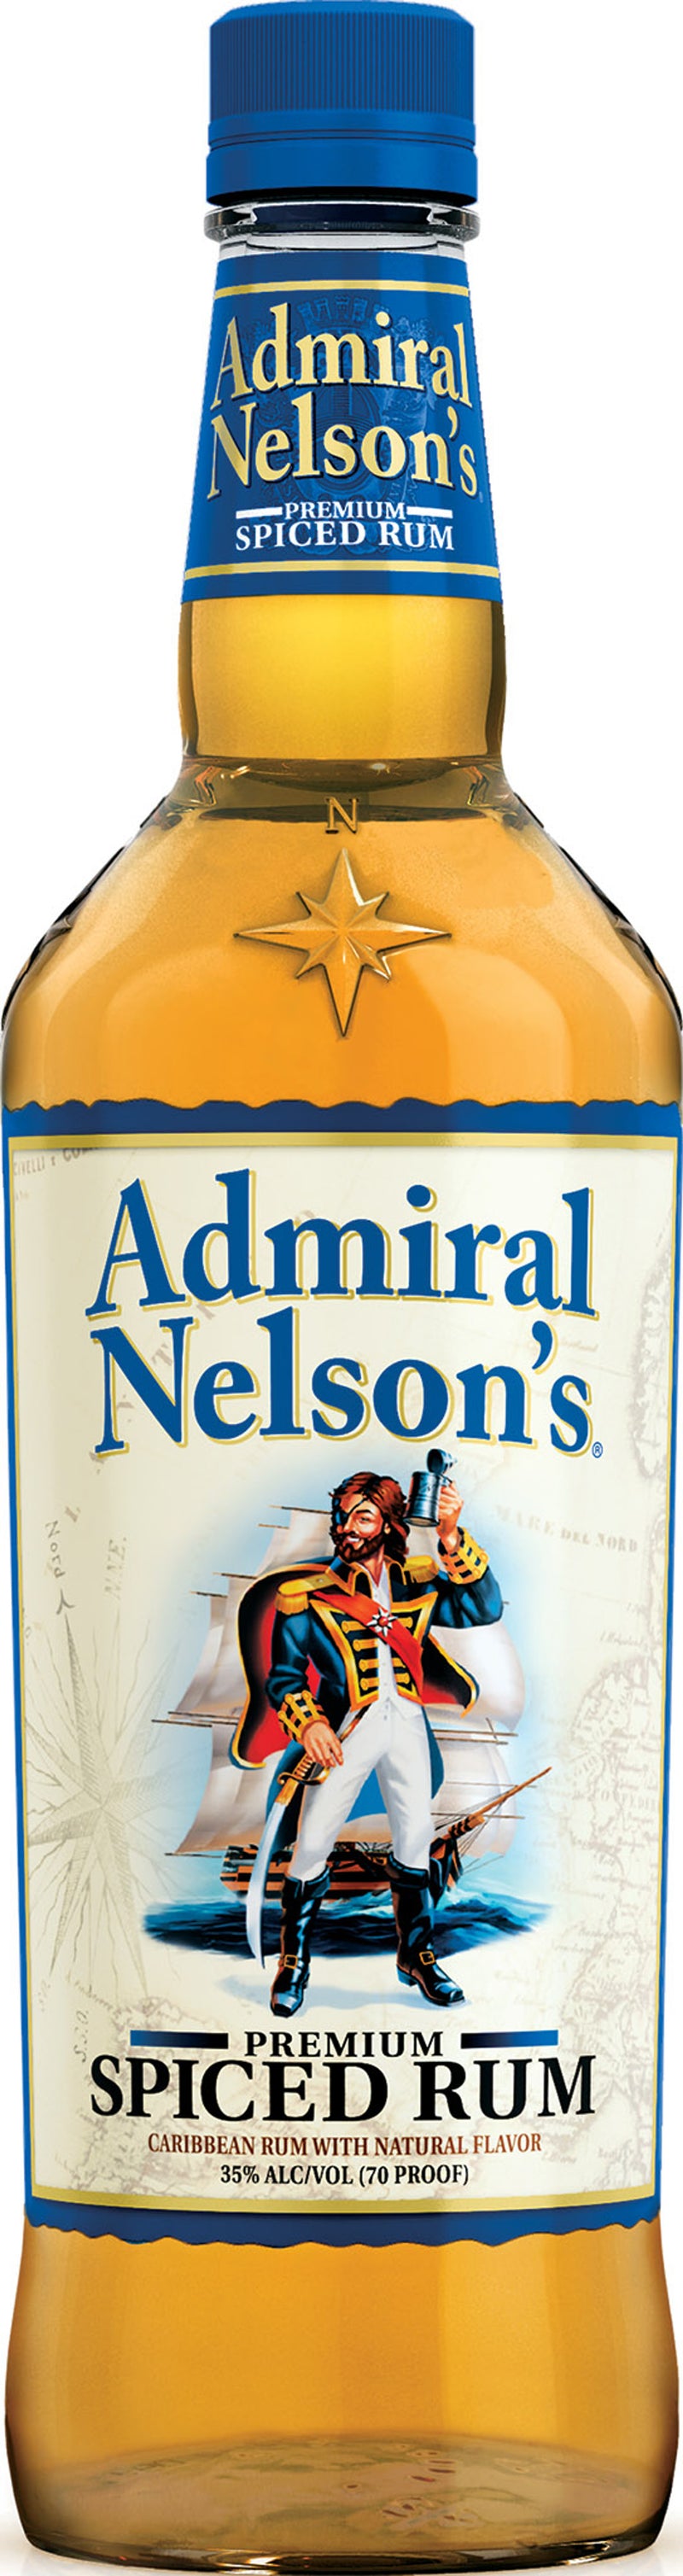 ADMIRAL NELSON'S SPICED